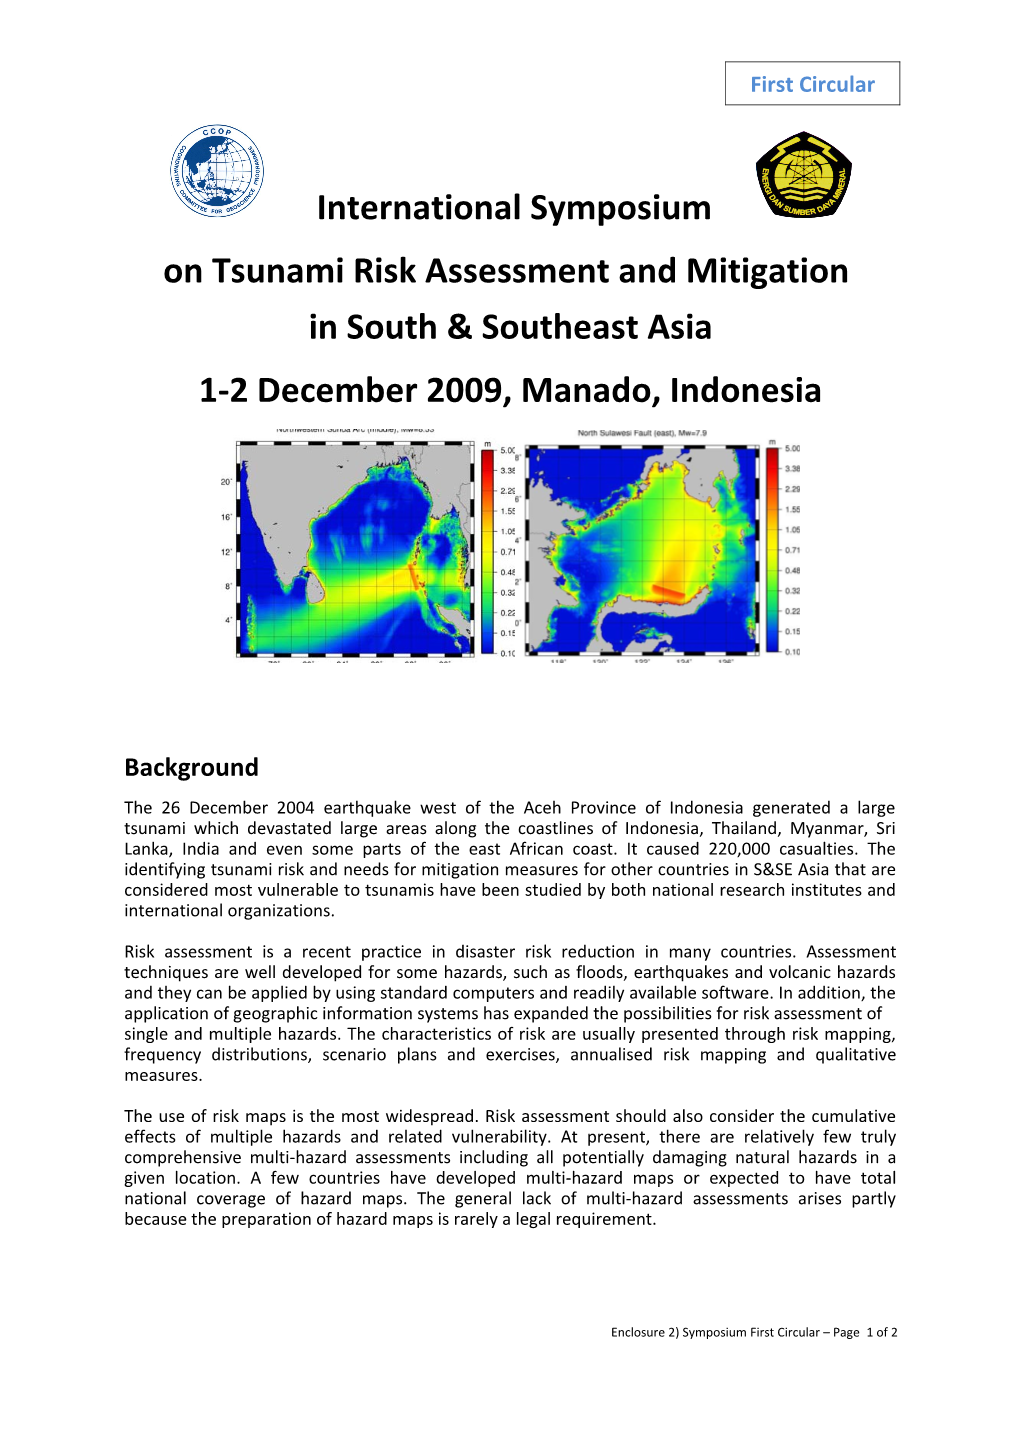 On Tsunami Risk Assessment and Mitigation